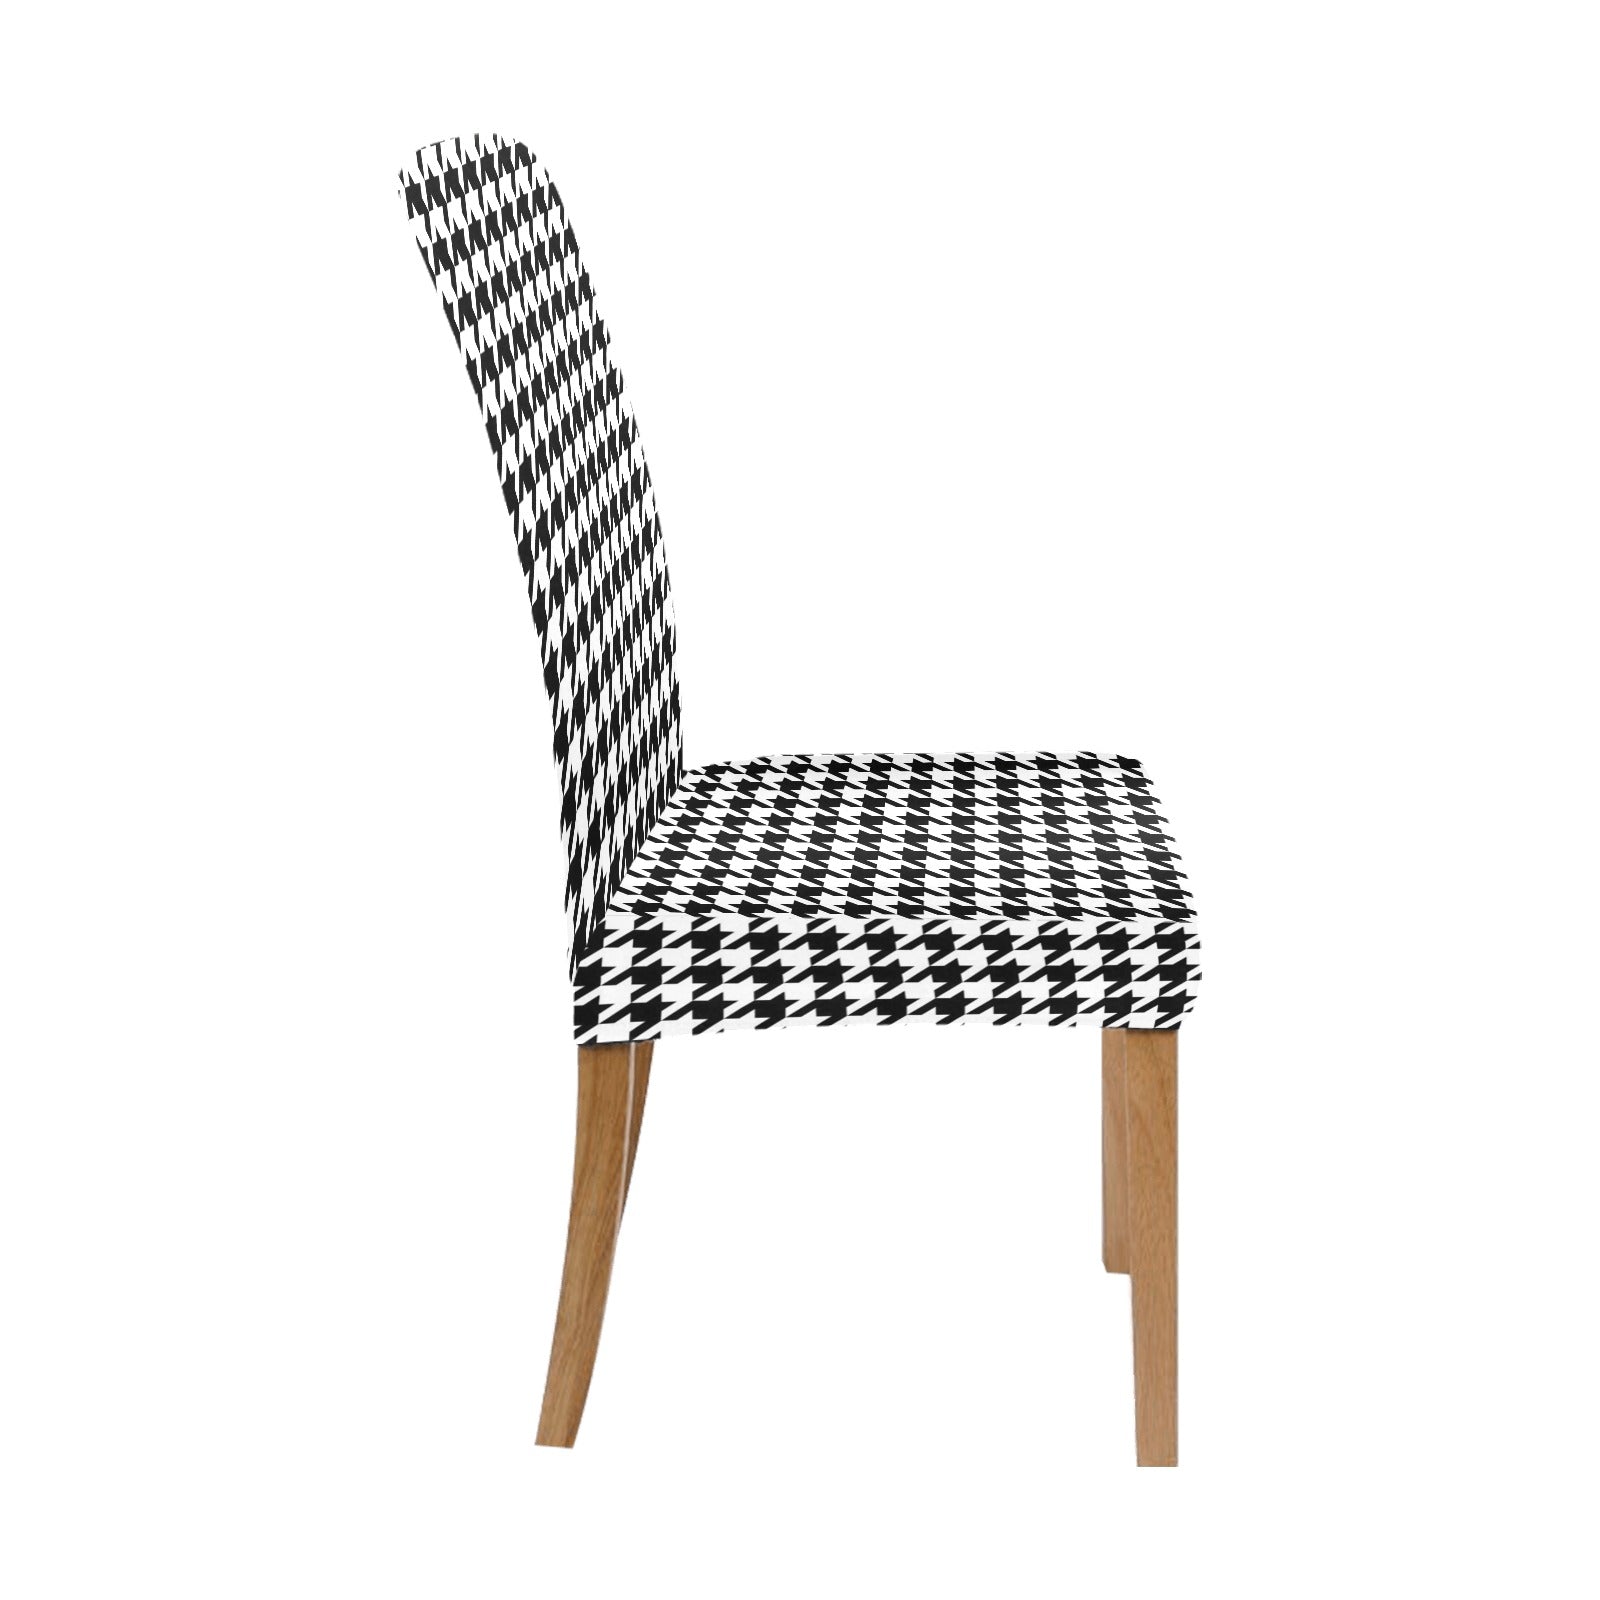 Houndstooth Dining Chair Seat Covers, Black White Pattern Stretch Slipcover Furniture Dining Room Party Banquet Home Decor Starcove Fashion